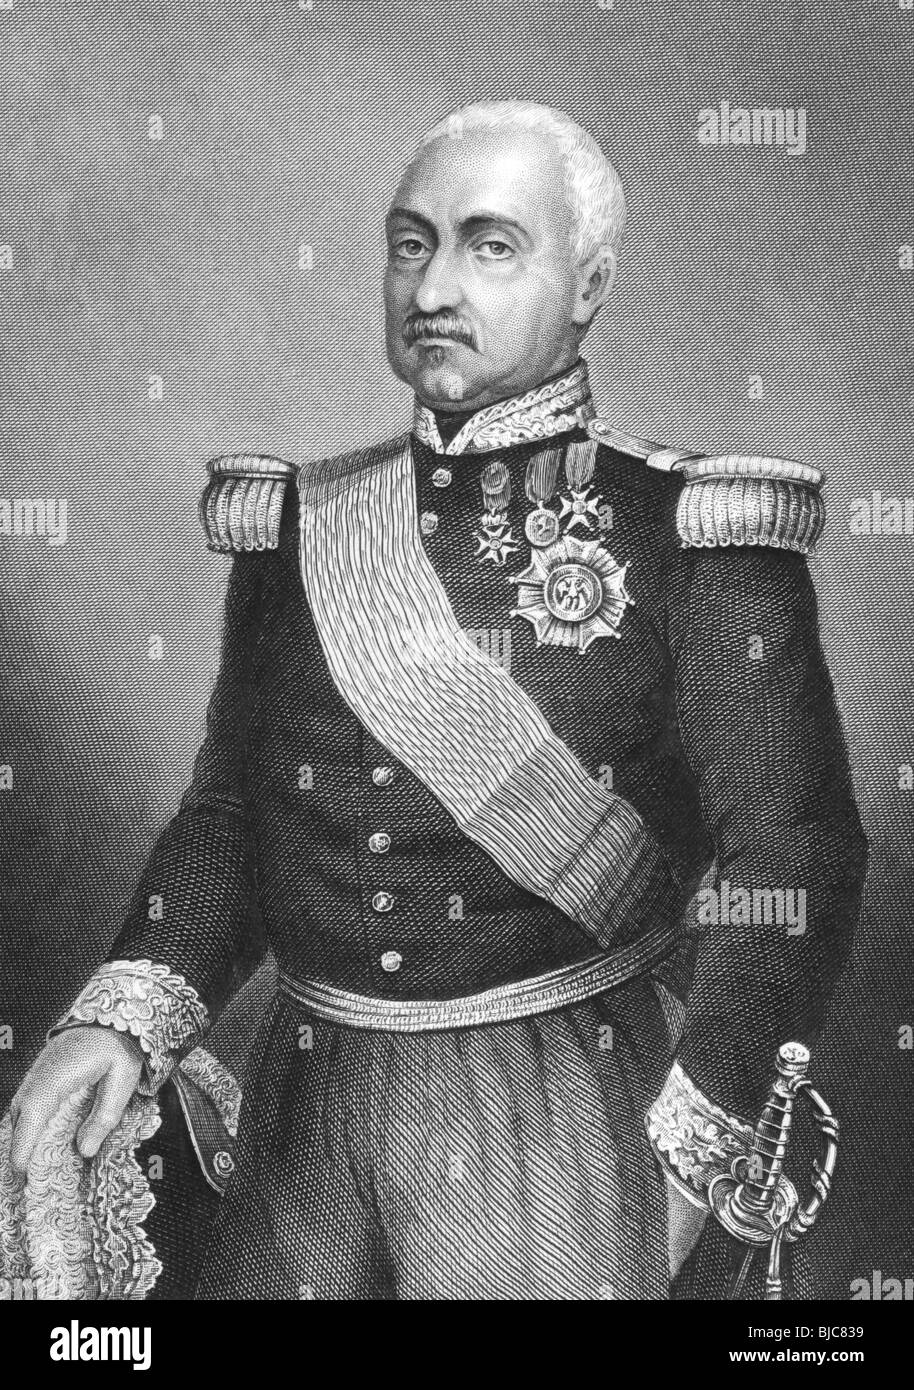 Aimable Pelissier, Duke of Malakhoff (1794-1864) on engraving from the 1800s. French marshal. Stock Photo